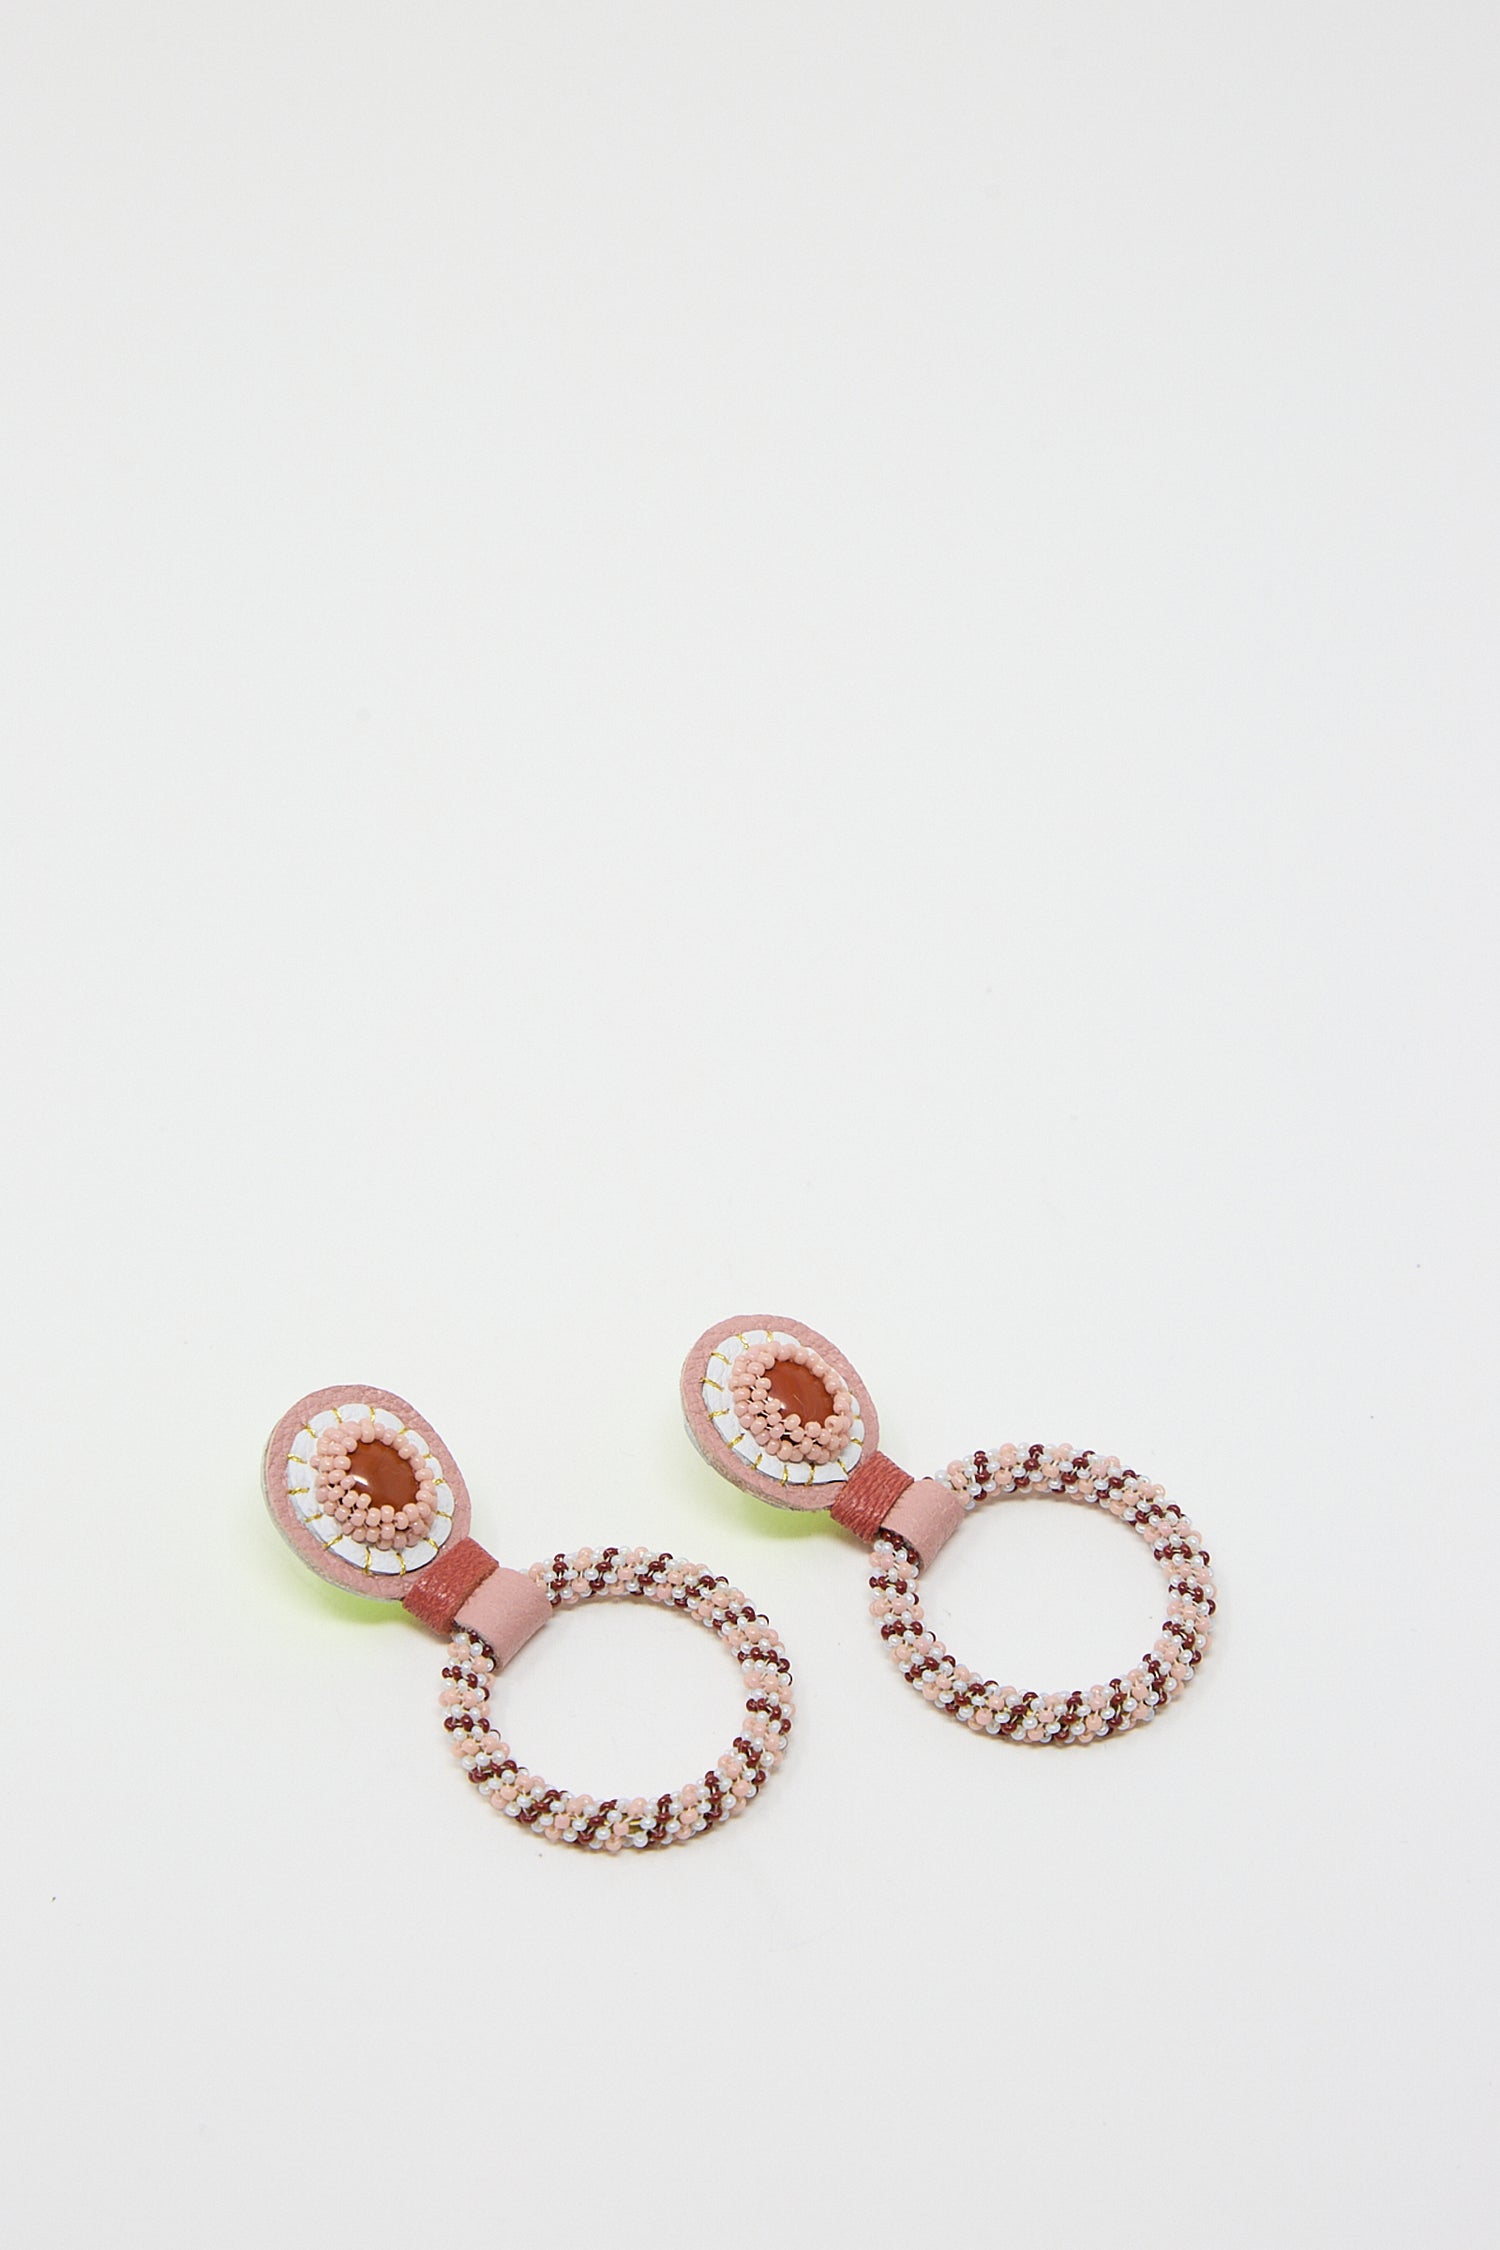 Pair of Small Beaded Hoops in Red Jasper stones by Robin Mollicone on white background.